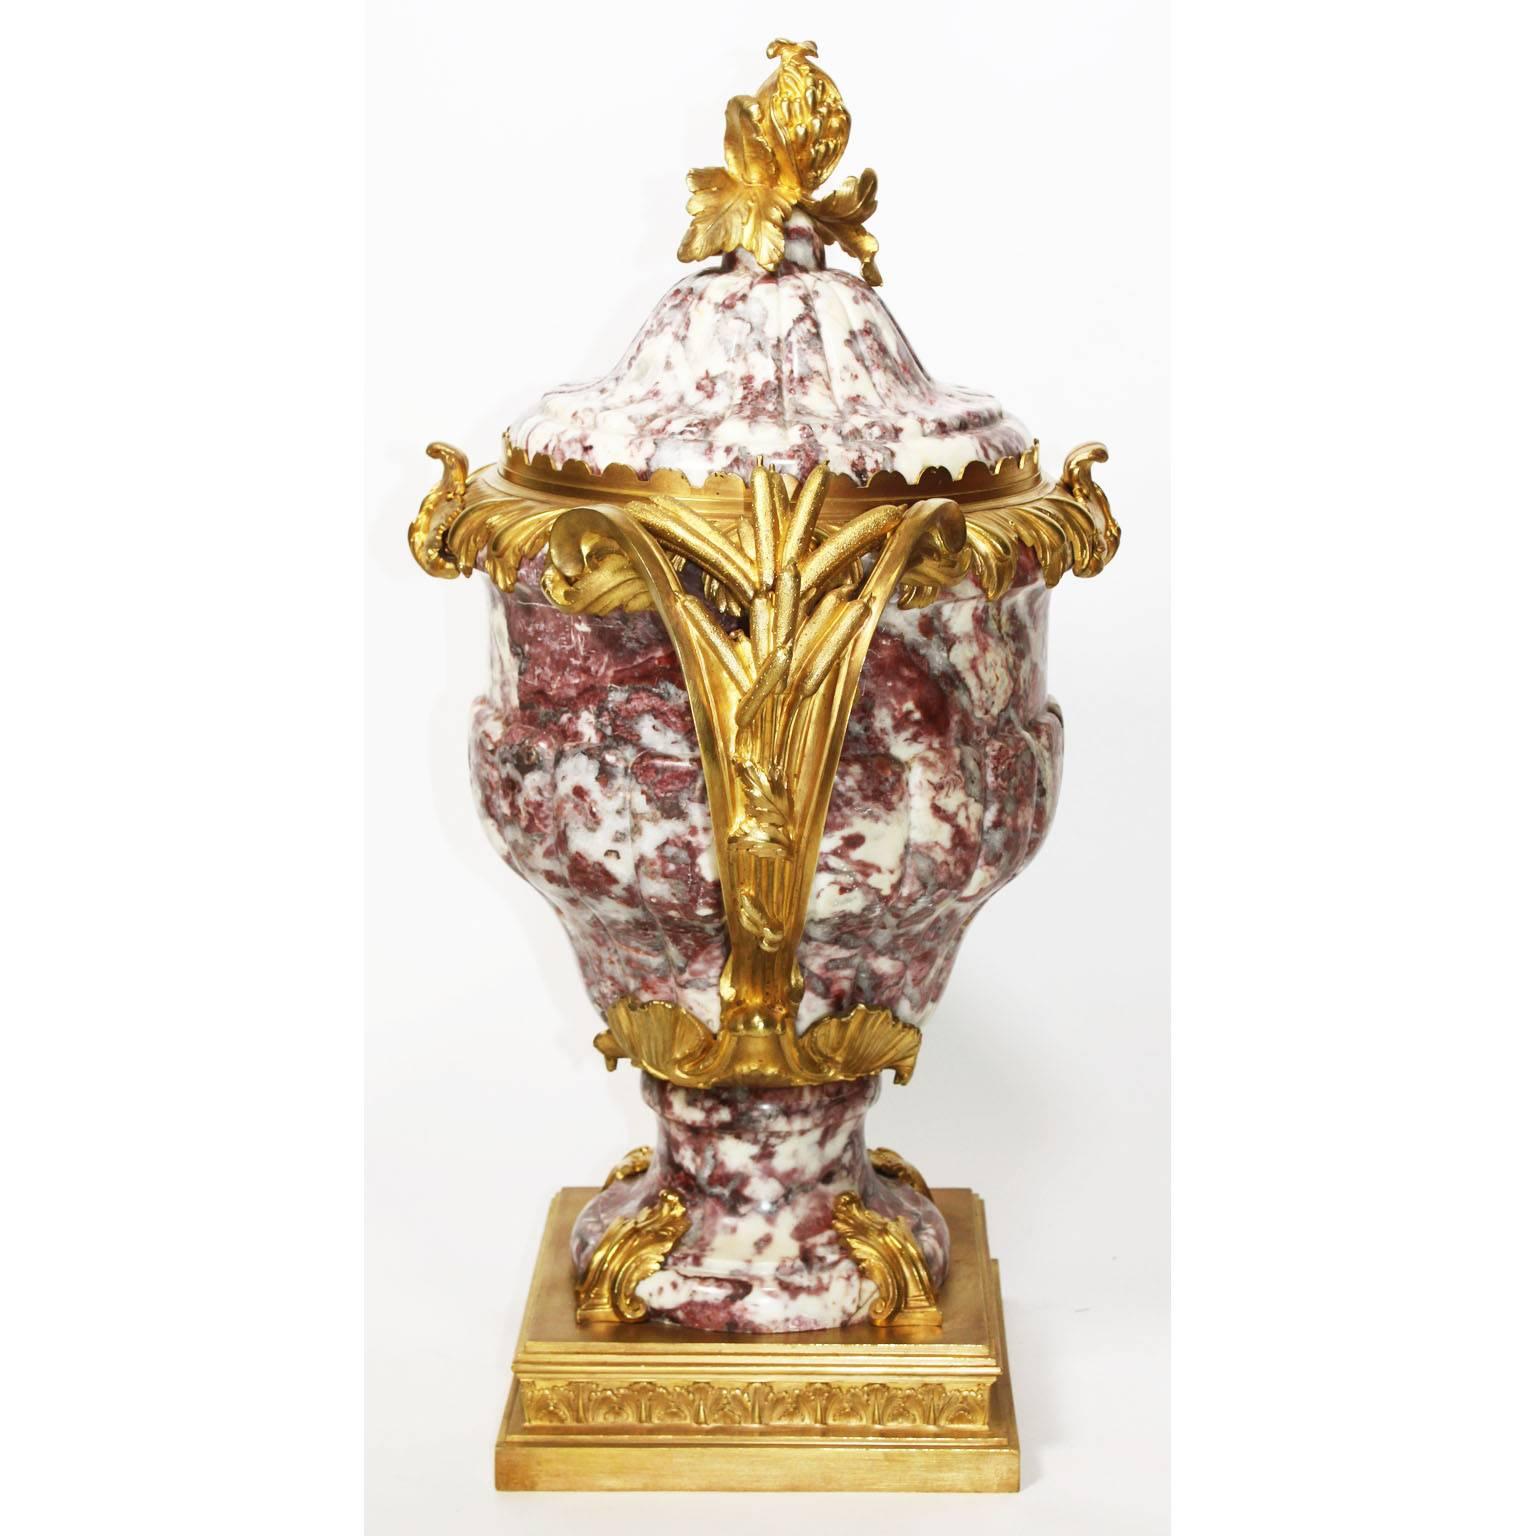 Early 20th Century French 19th-20th Century Louis XV Style Ormolu-Mounted Marble Urn For Sale